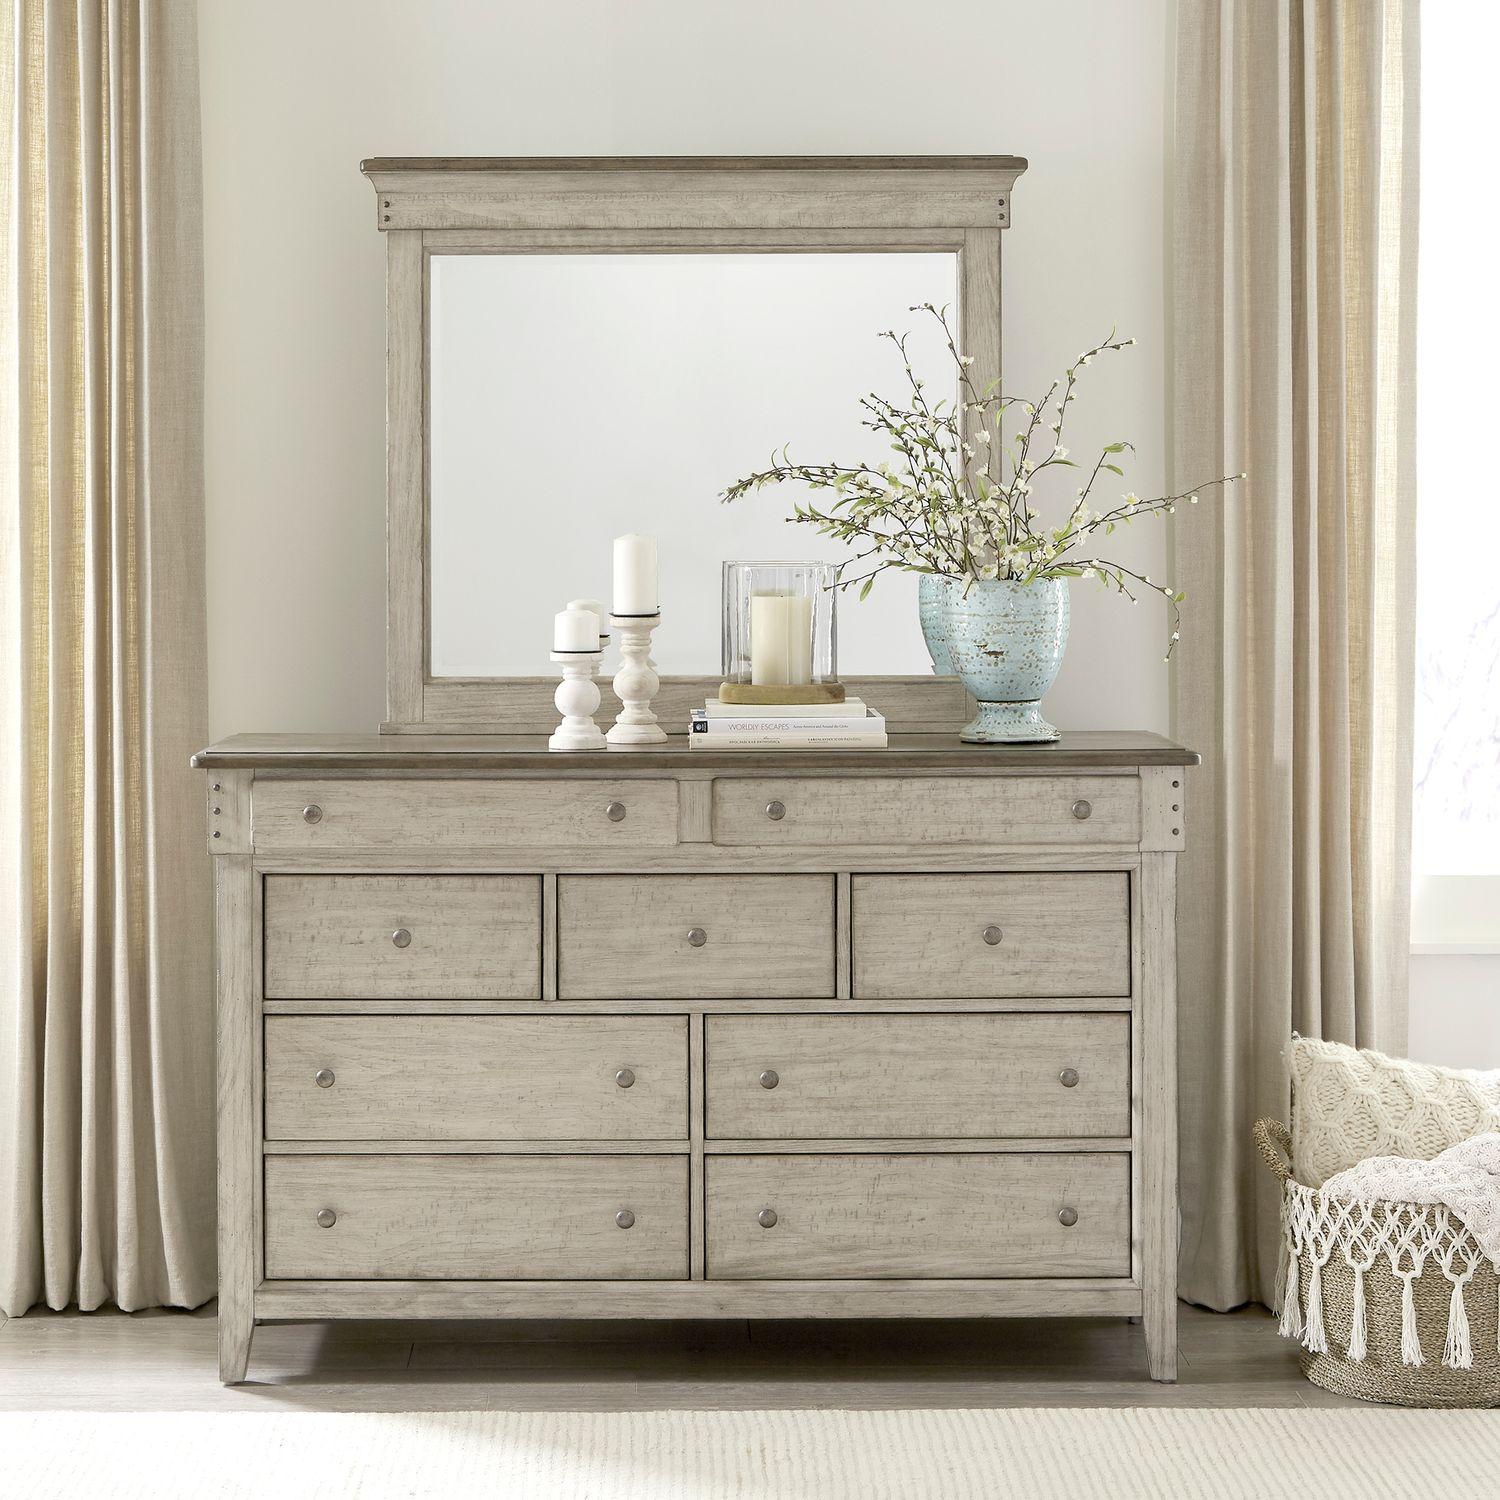 Contemporary, Cottage Dresser With Mirror Ivy Hollow (457-BR) 457-BR-DM in Taupe 